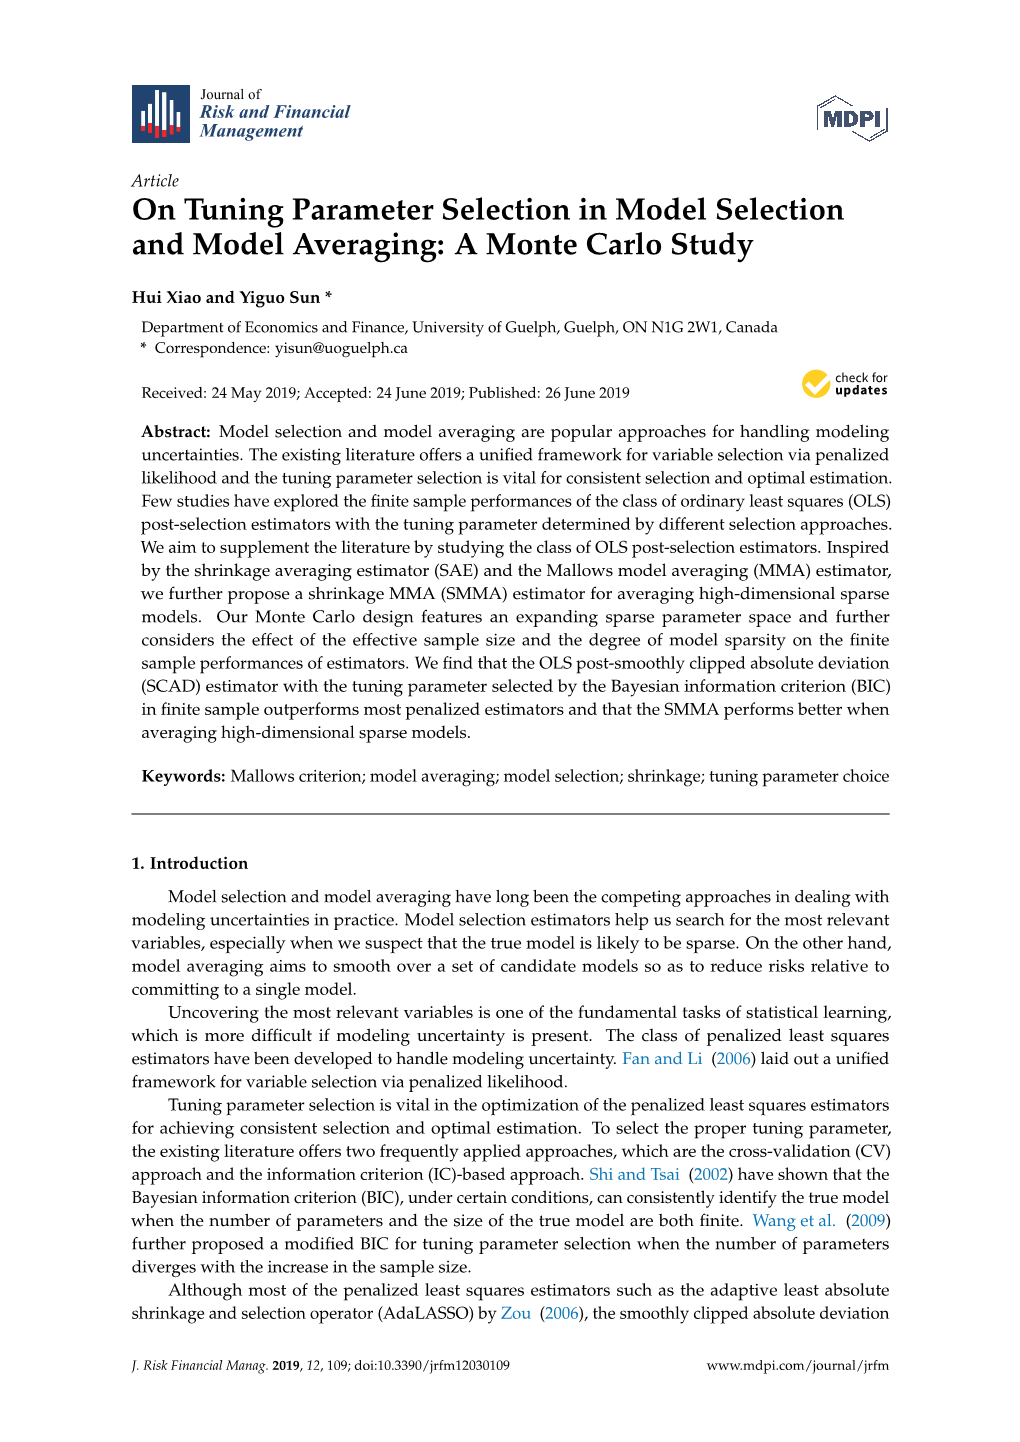 On Tuning Parameter Selection in Model Selection and Model Averaging: a Monte Carlo Study